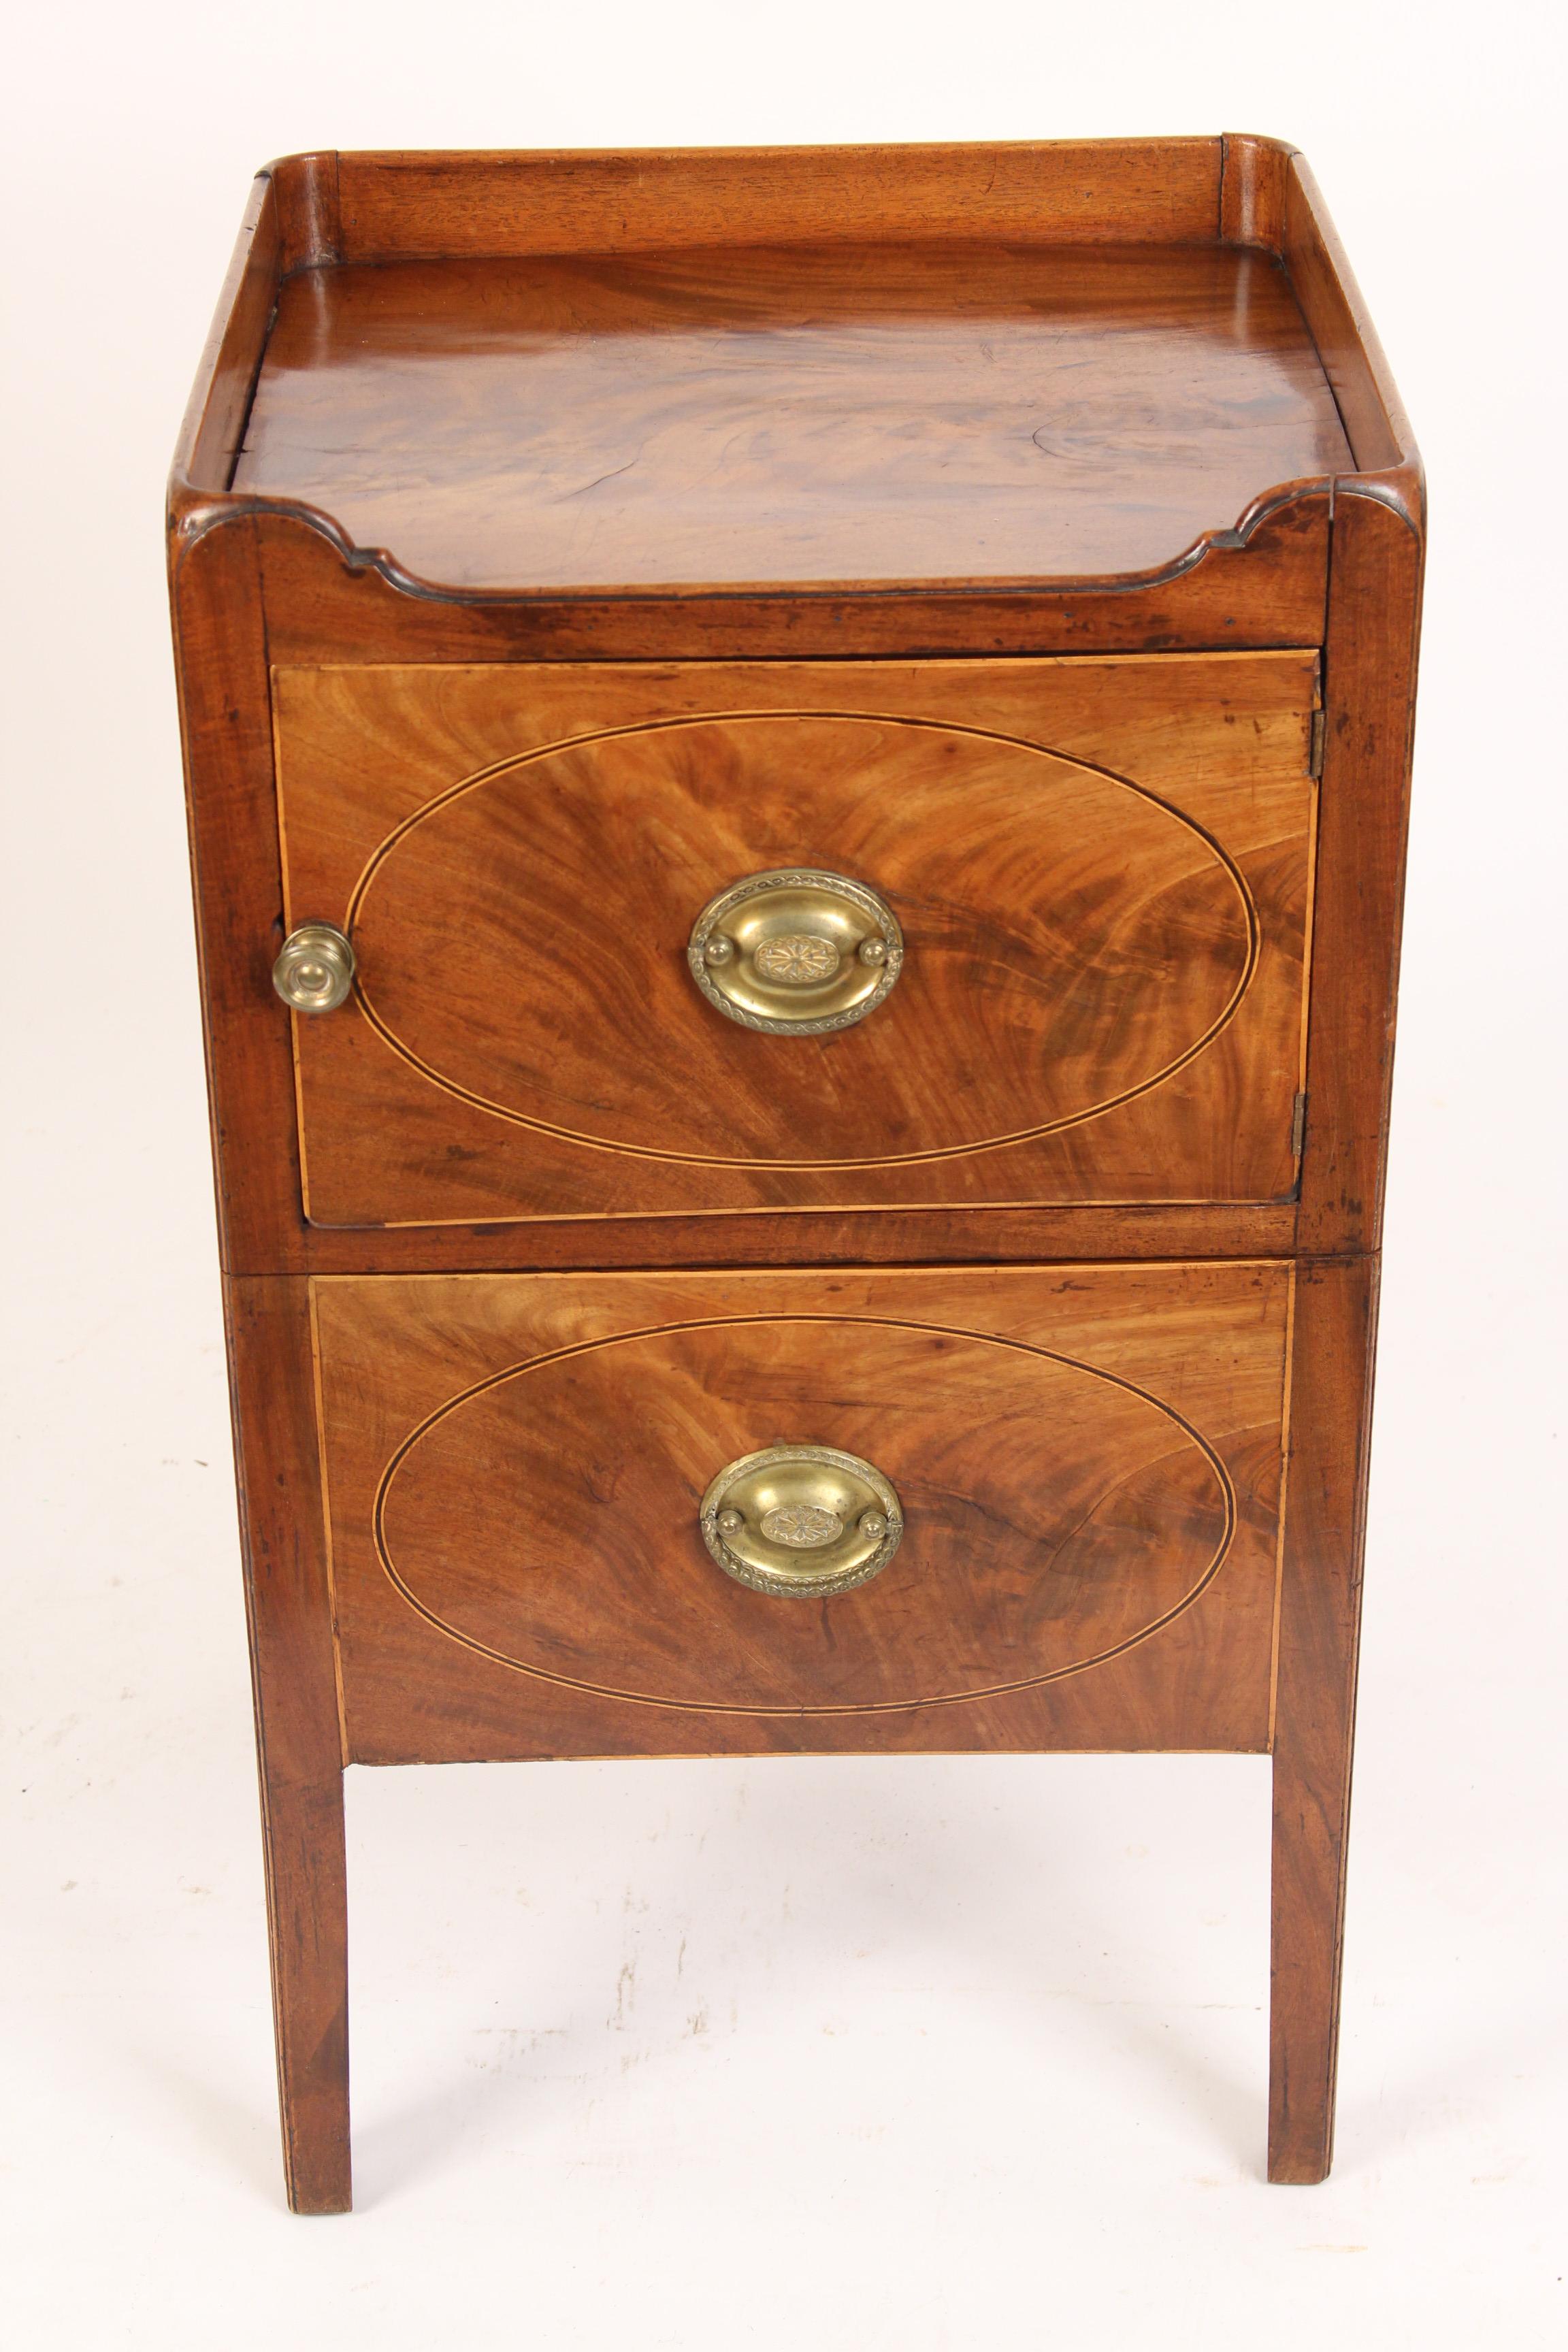 George III mahogany bedside commode, circa 1800. With nice quality flame mahogany used on front and top of commode. Measures: The overall height is 30